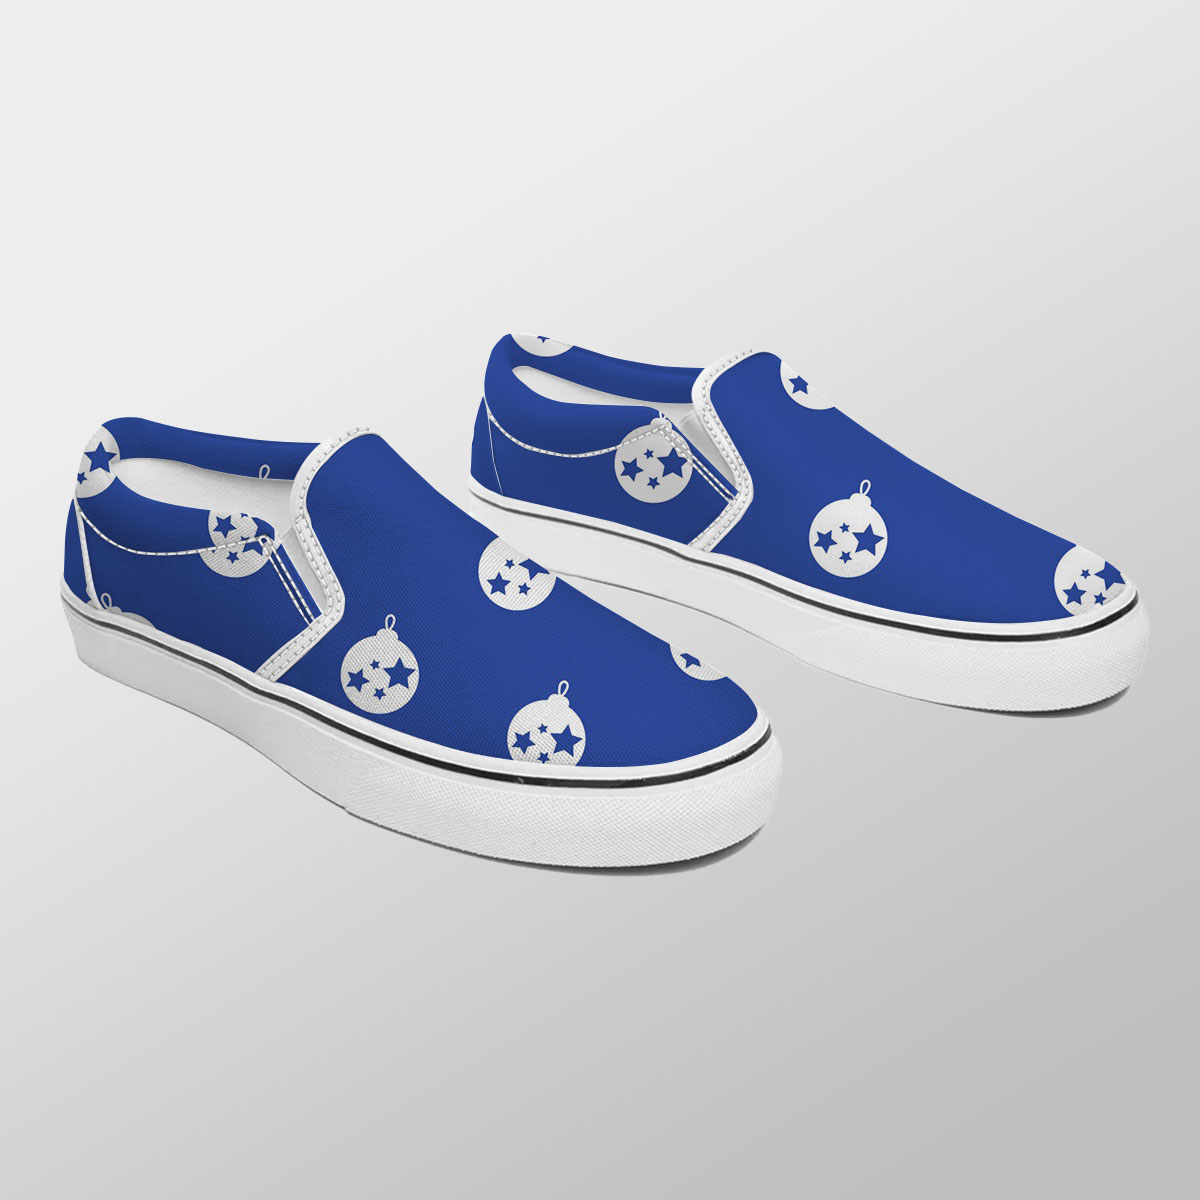 Christmas Balls On The Navy Blue Background Slip On Sneakers